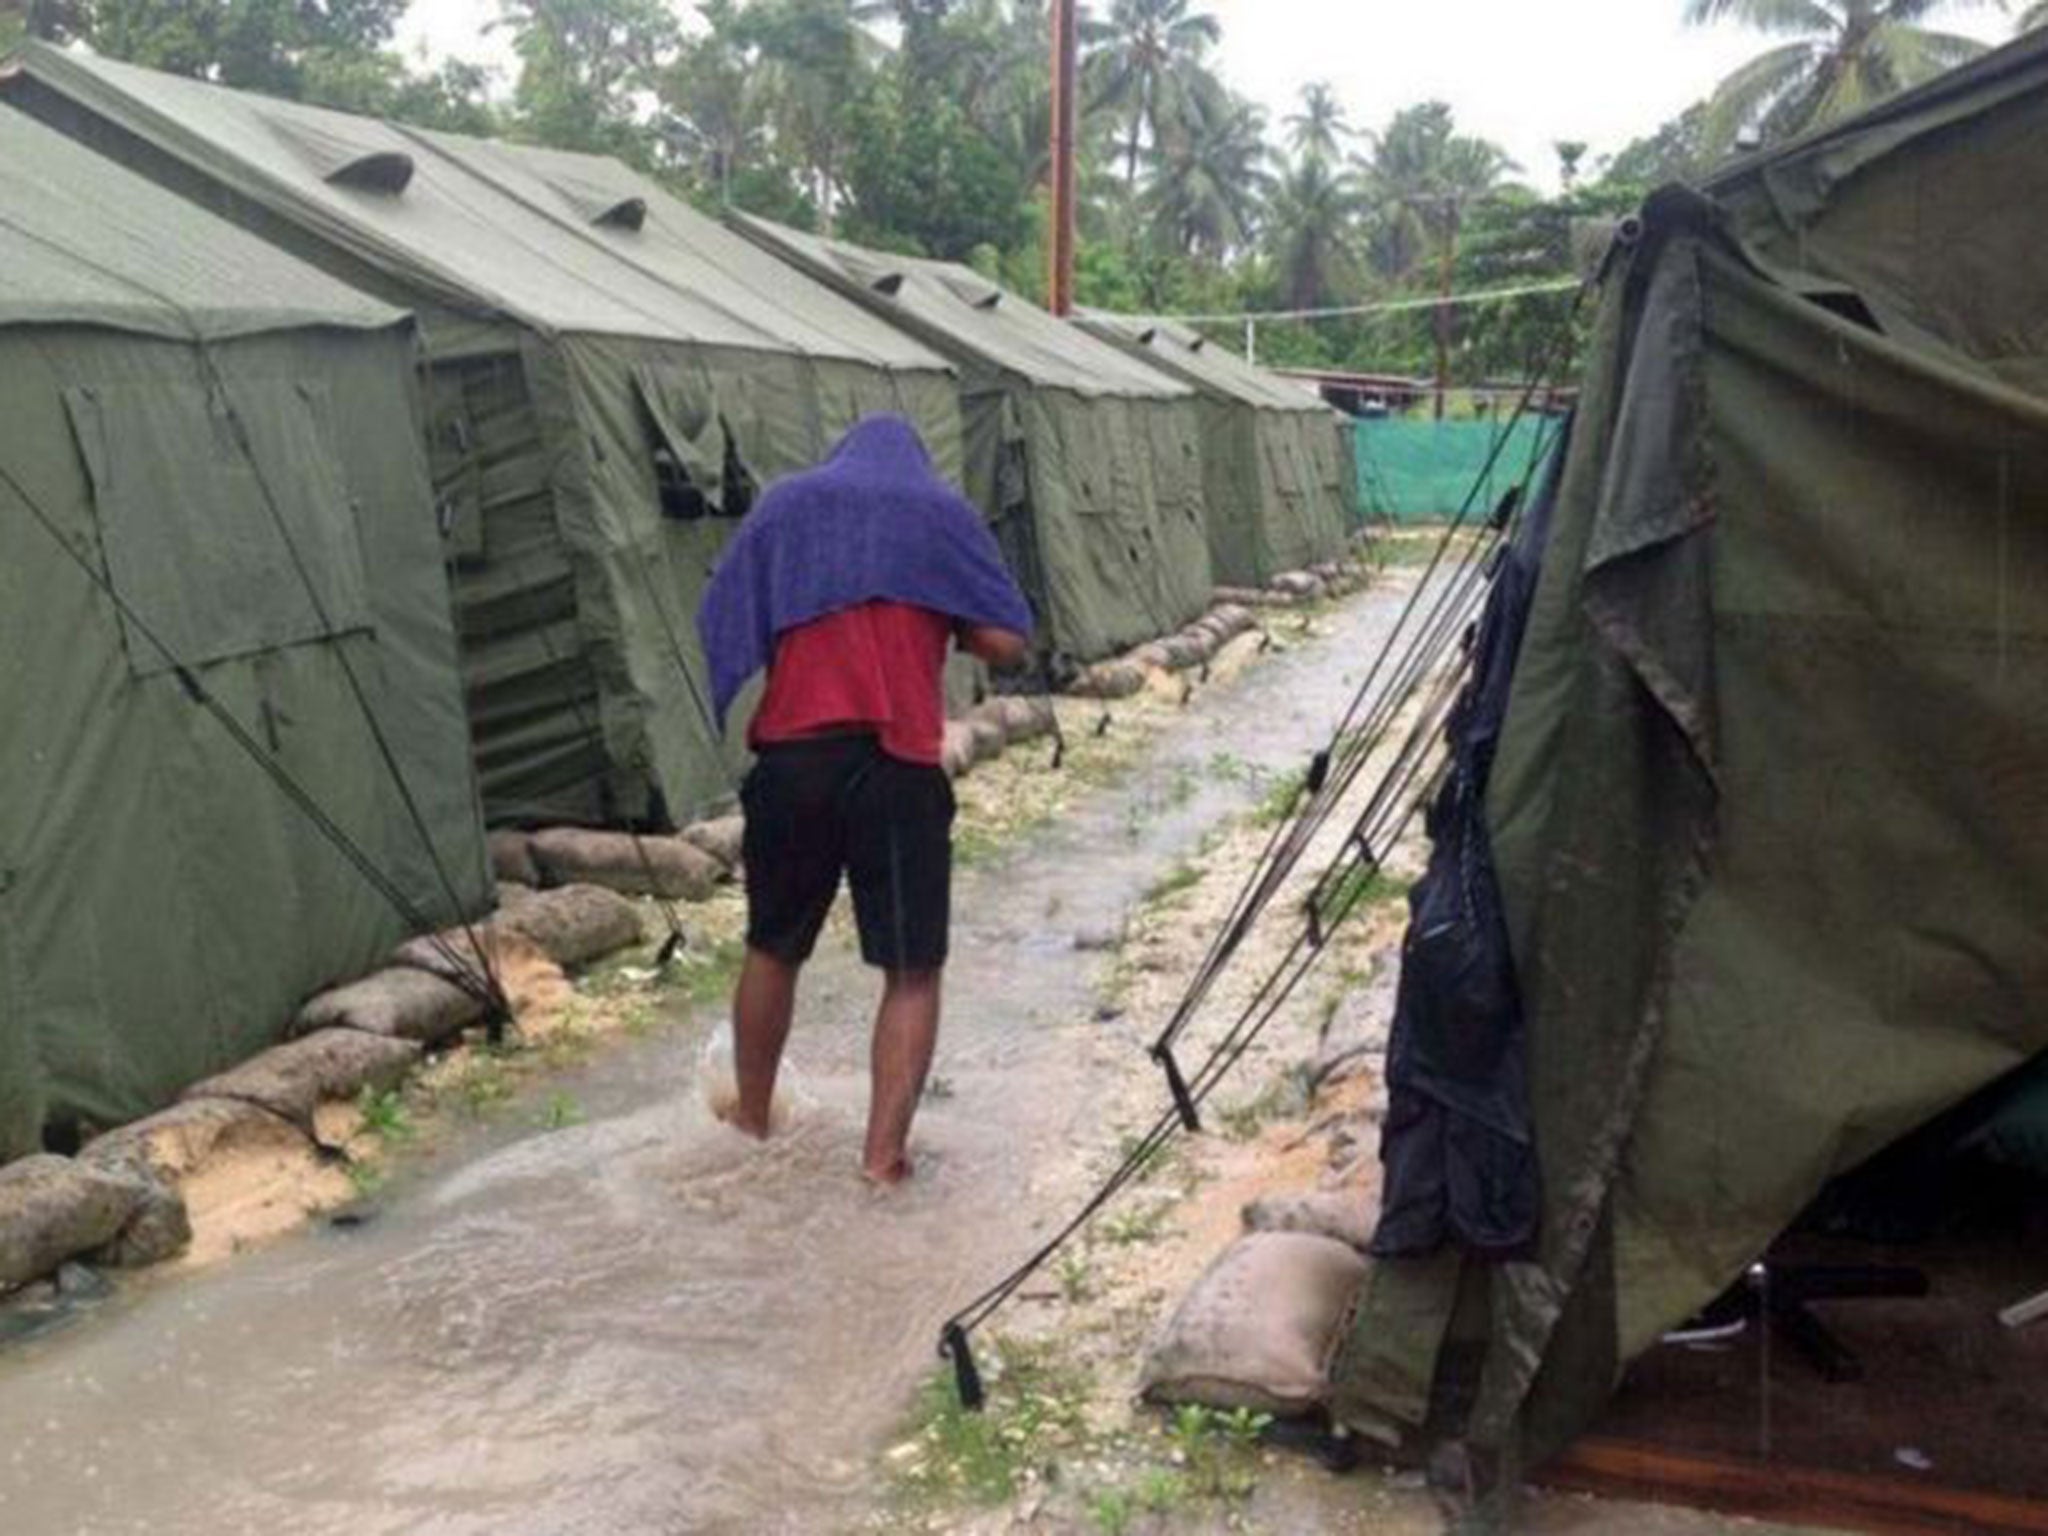 A man walks between tents at Australia's regional processing centre on Manus Island, where one inmate died in riots today